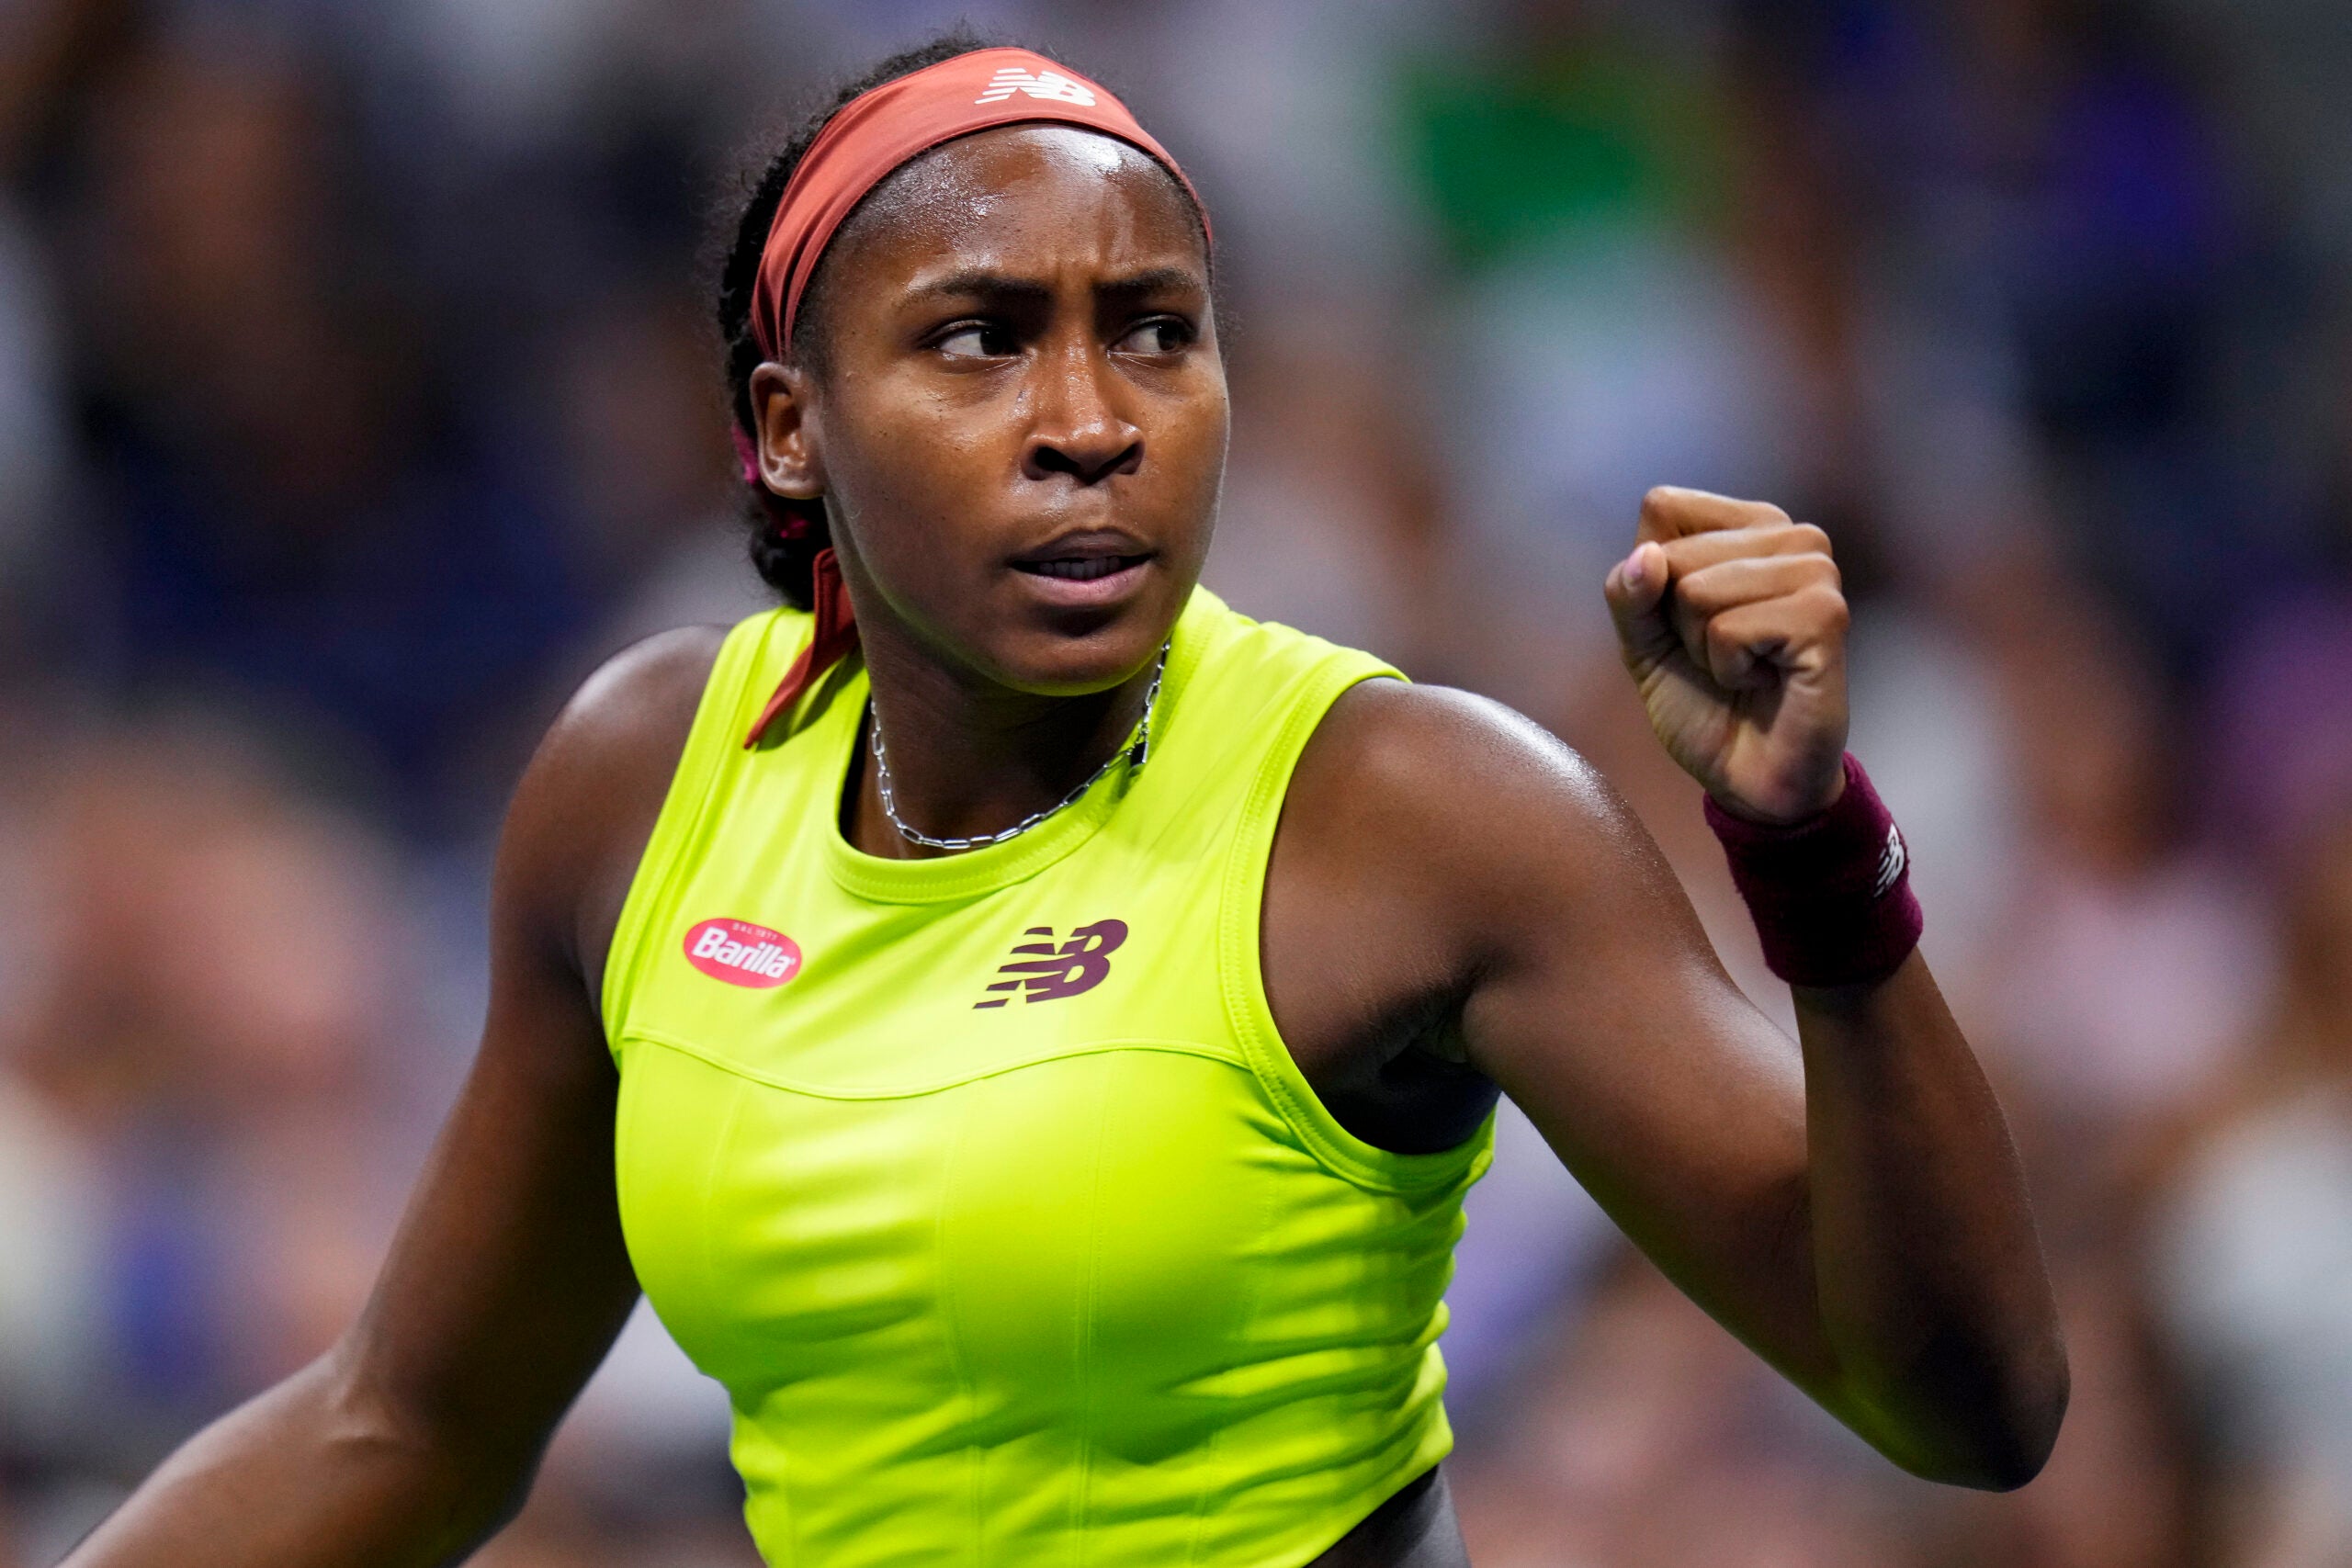 Coco Gauff, of the United States, reacts during a match.